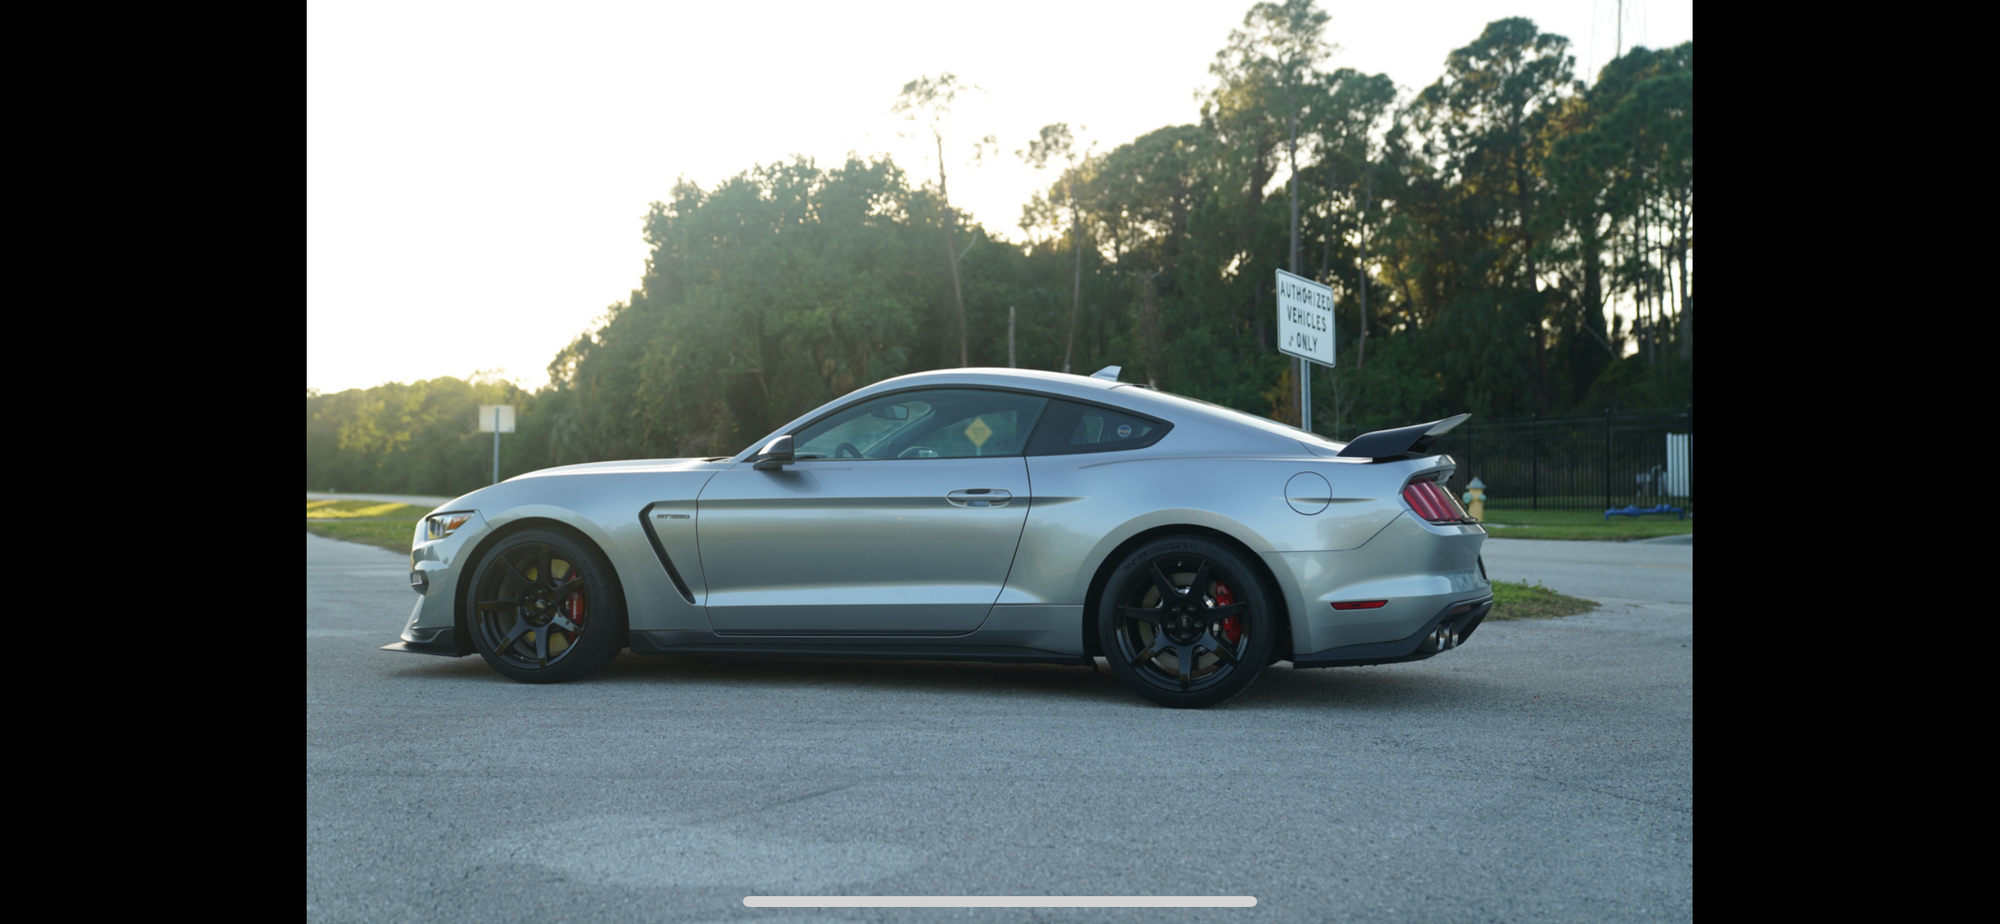 2020 Ford Shelby GT350 - 2020 GT350R - Iconic Silver - 4300 miles - Used - VIN 1fa6p8jz9l5551820 - 4,300 Miles - 8 cyl - 2WD - Manual - Coupe - Silver - St Petersburg, FL 33702, United States